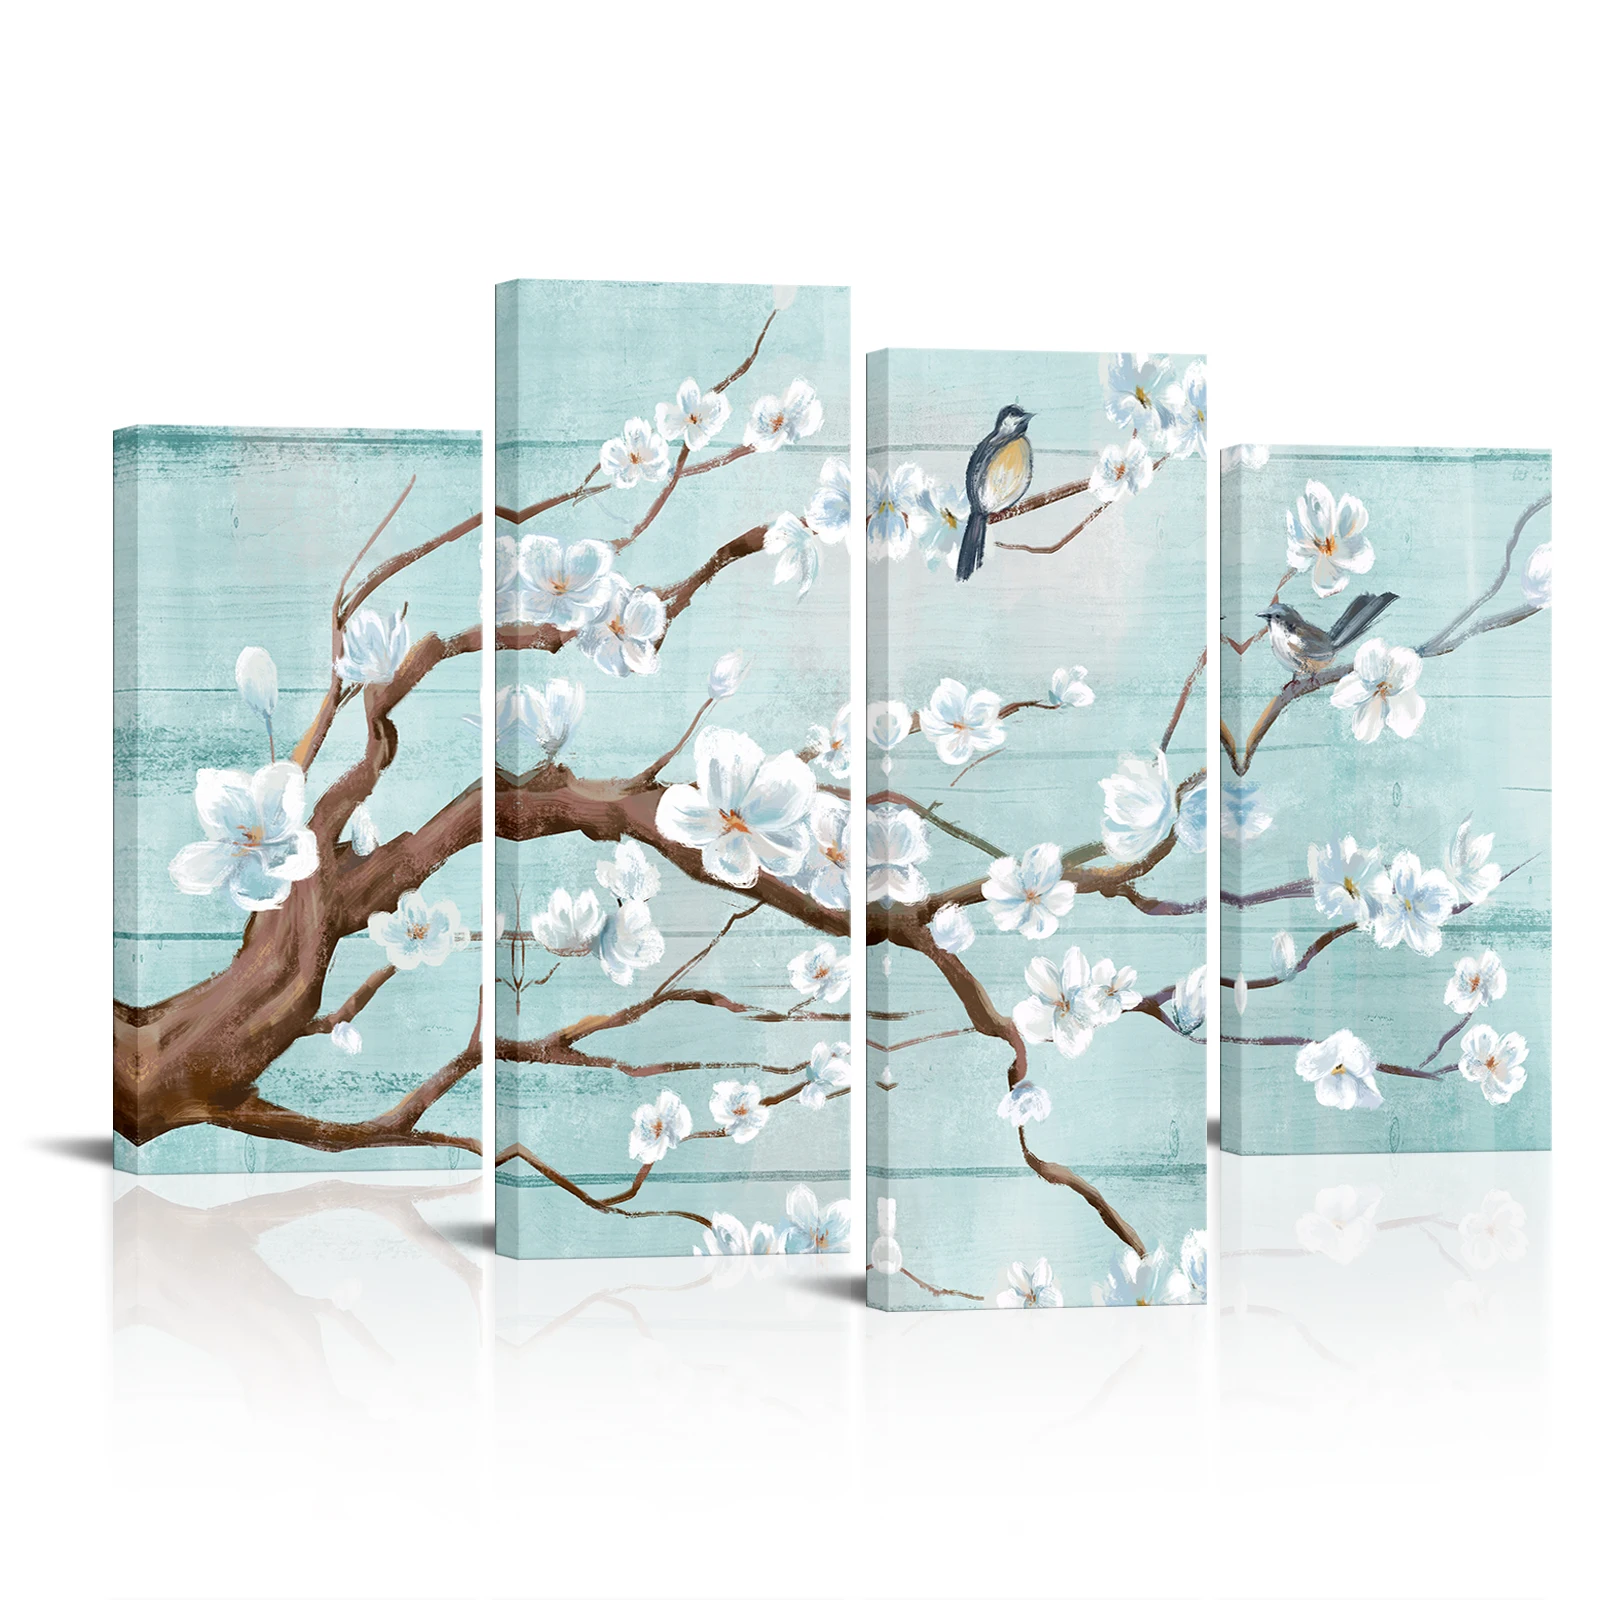 

4 Pieces Flowers and Birds Home Decor Poster White Flowers Print Canvas Painting Modern Style Picture Living Room Wall Art